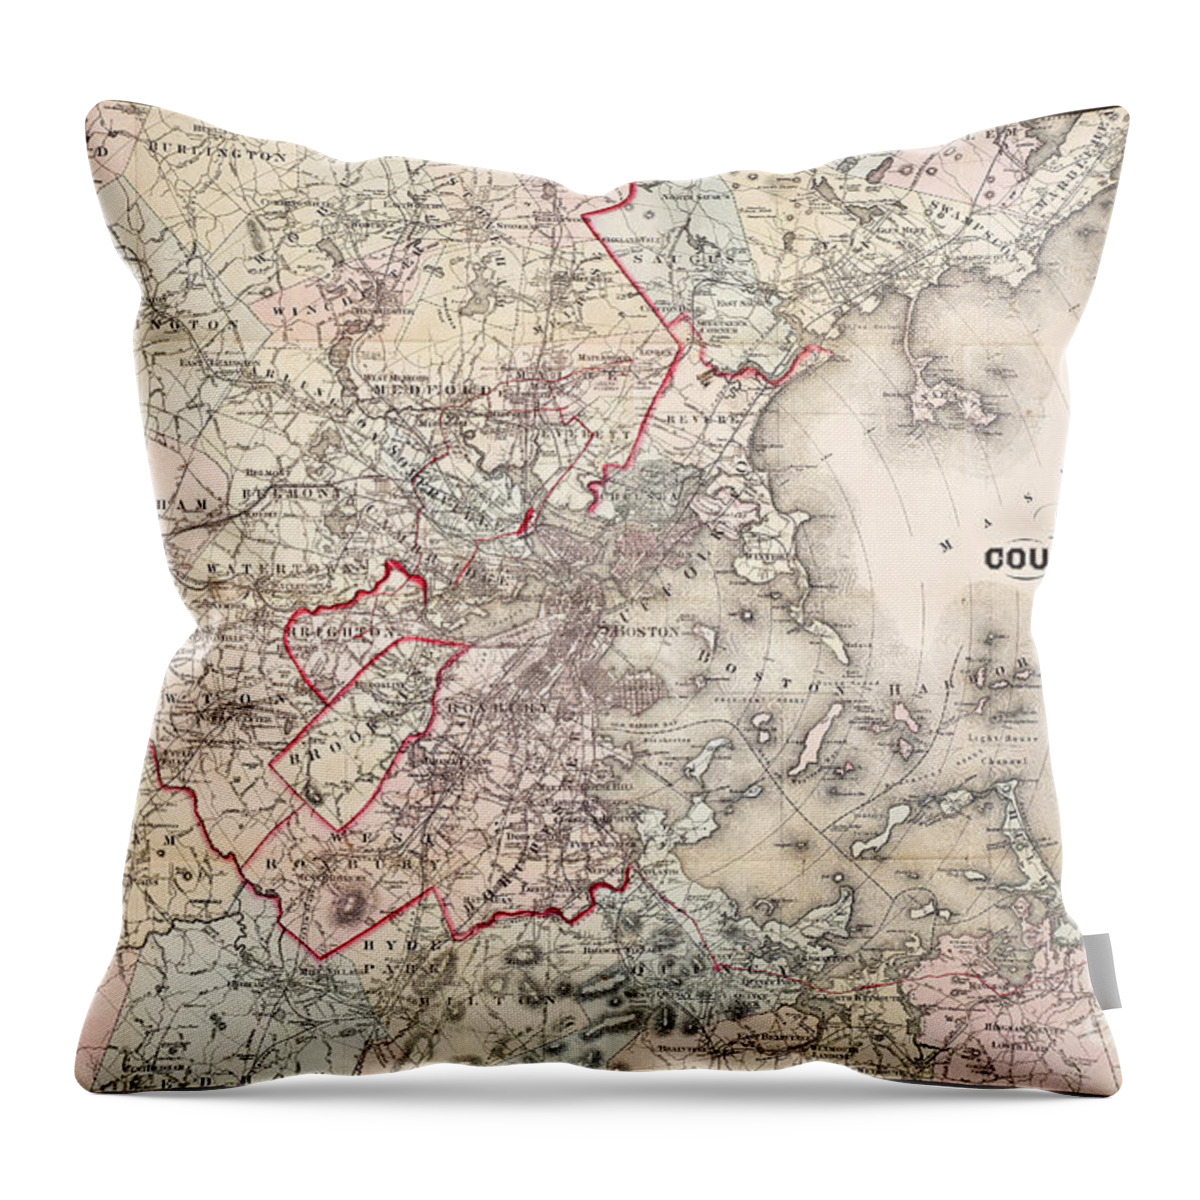 1883 Throw Pillow featuring the photograph Map: Boston, 1883 by Granger